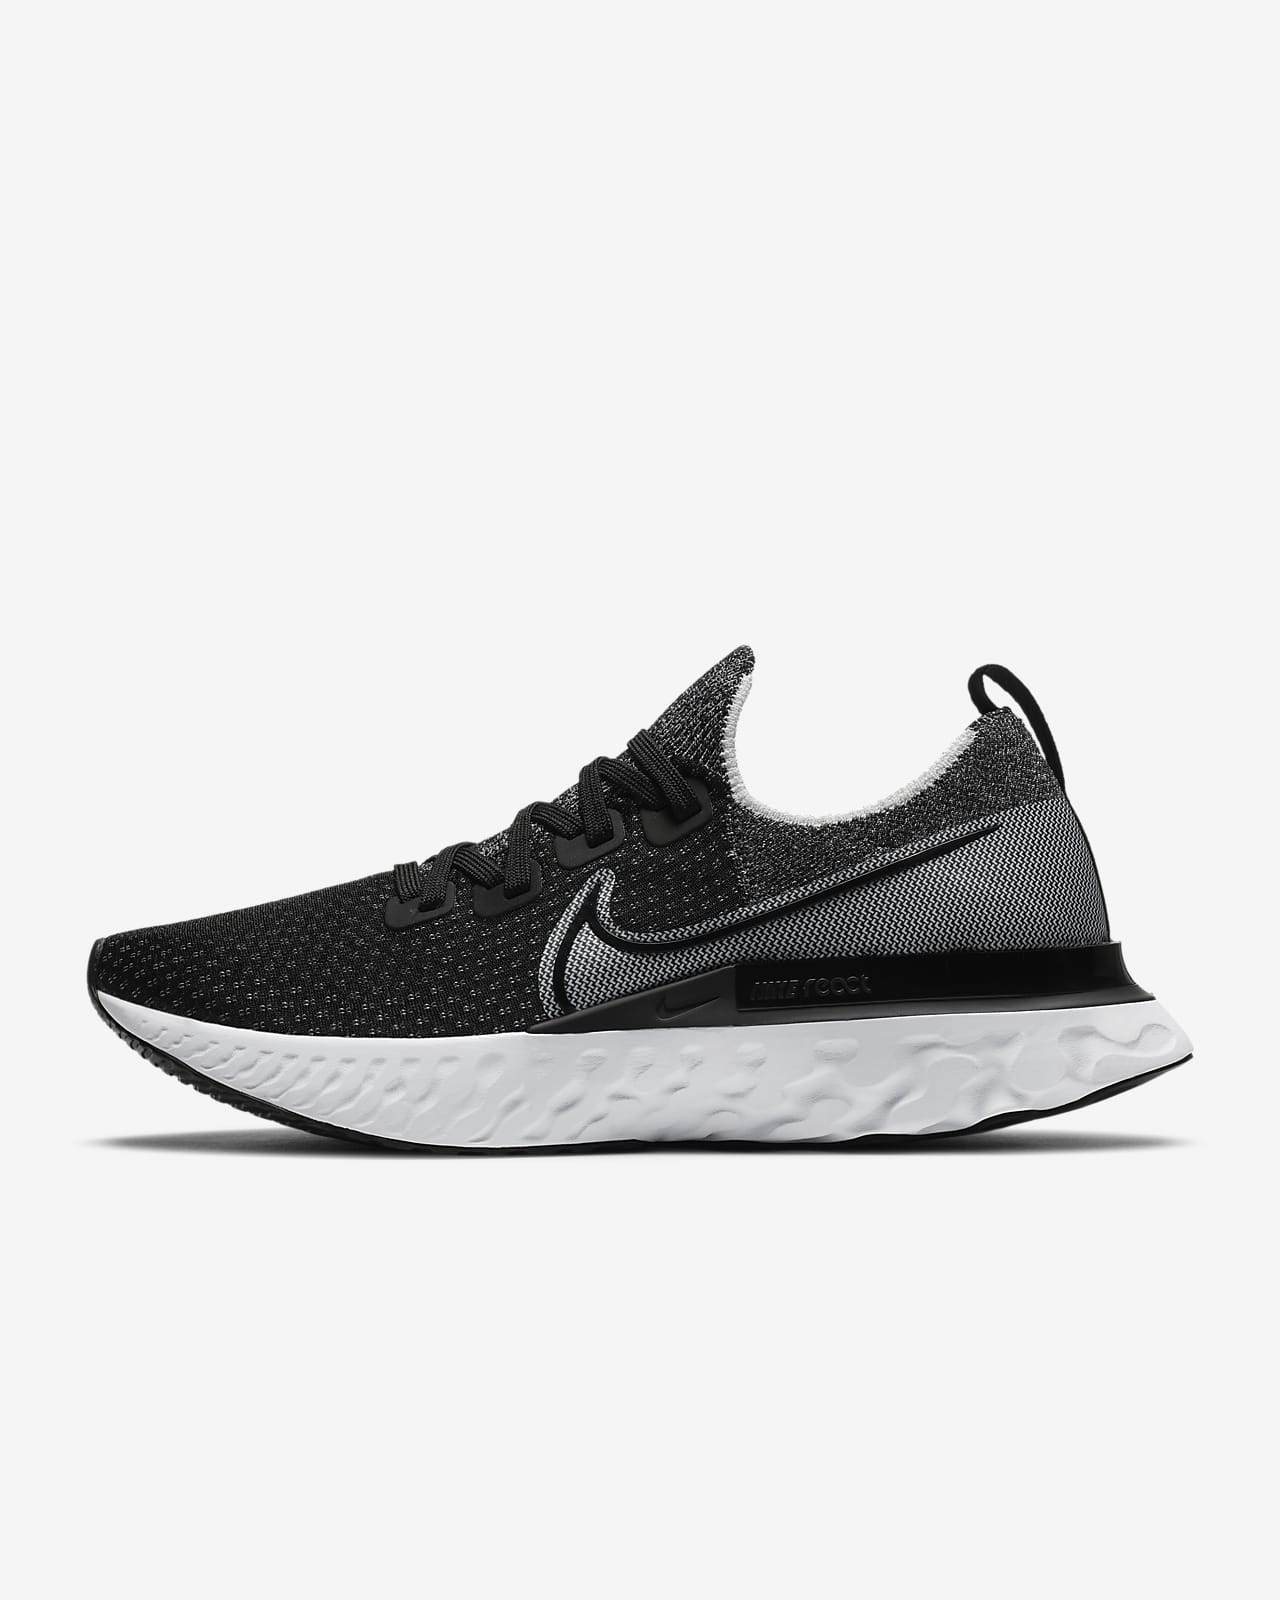 nike shoes for men wide